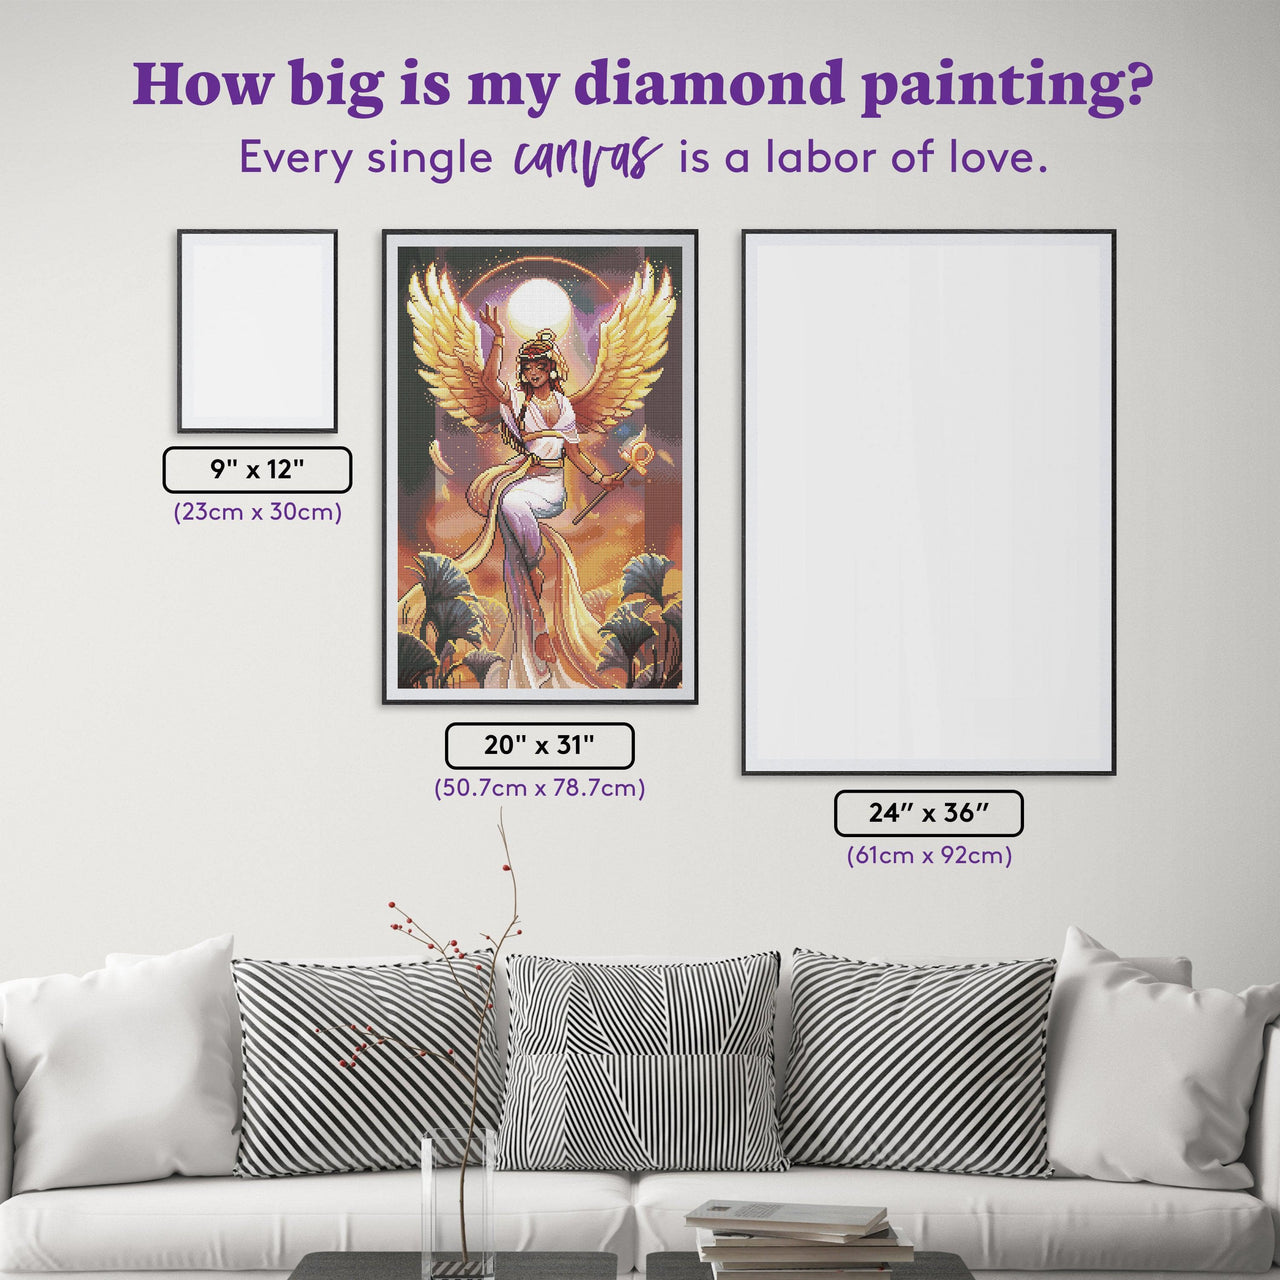 Diamond Painting Aset, Goddess of Magic and Healing 20" x 31" (50.7cm x 78.7cm) / Round with 52 Colors including 3 ABs and 1 Fairy Dust Diamonds / 50,861